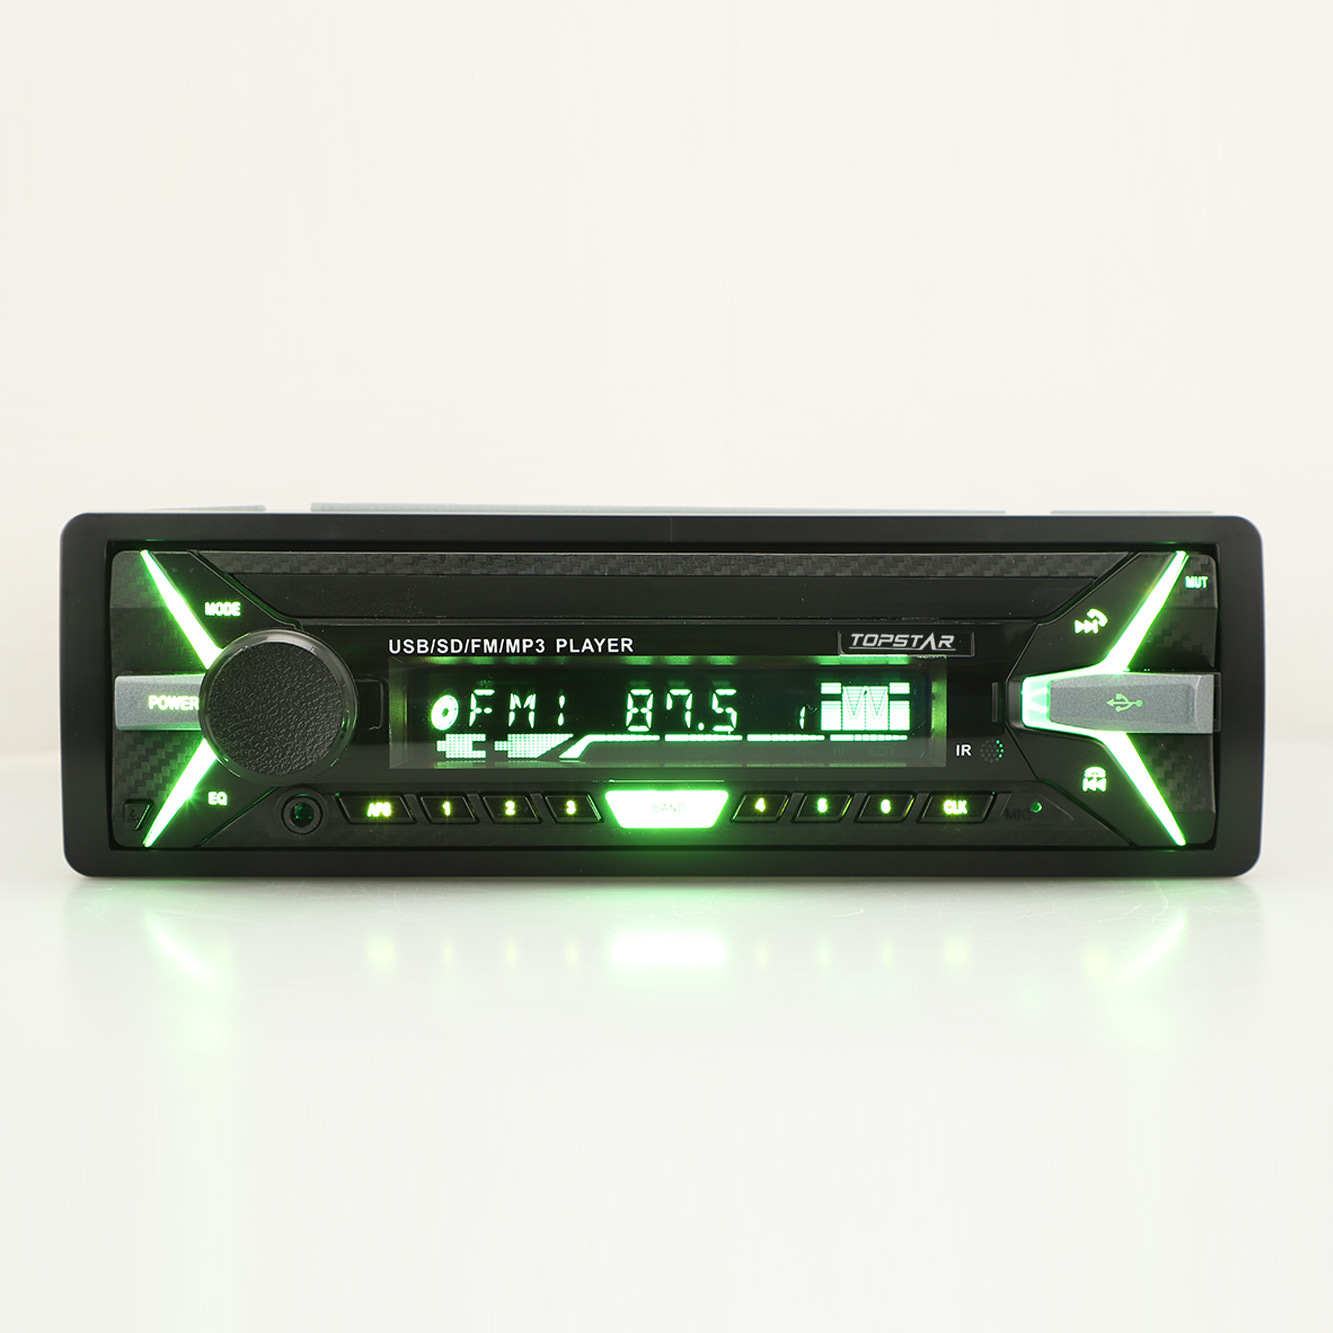 MP3 no carro MP3 Player LCD Display Single DIN Stereo Car LCD Player